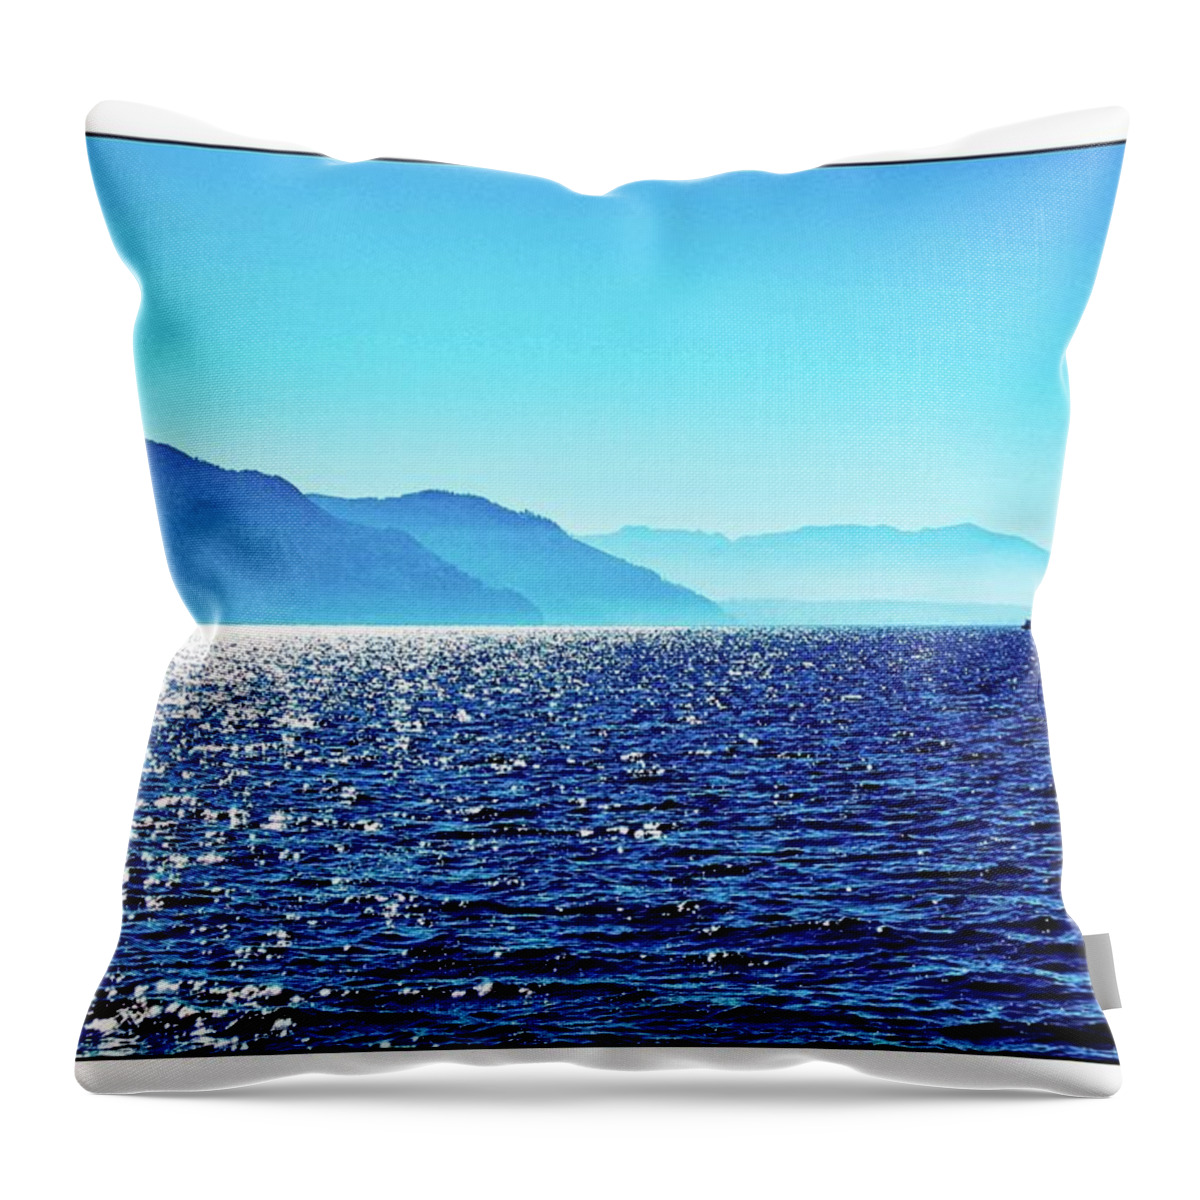 Bellingham Bay Throw Pillow featuring the photograph Bay In Blue by Craig Perry-Ollila